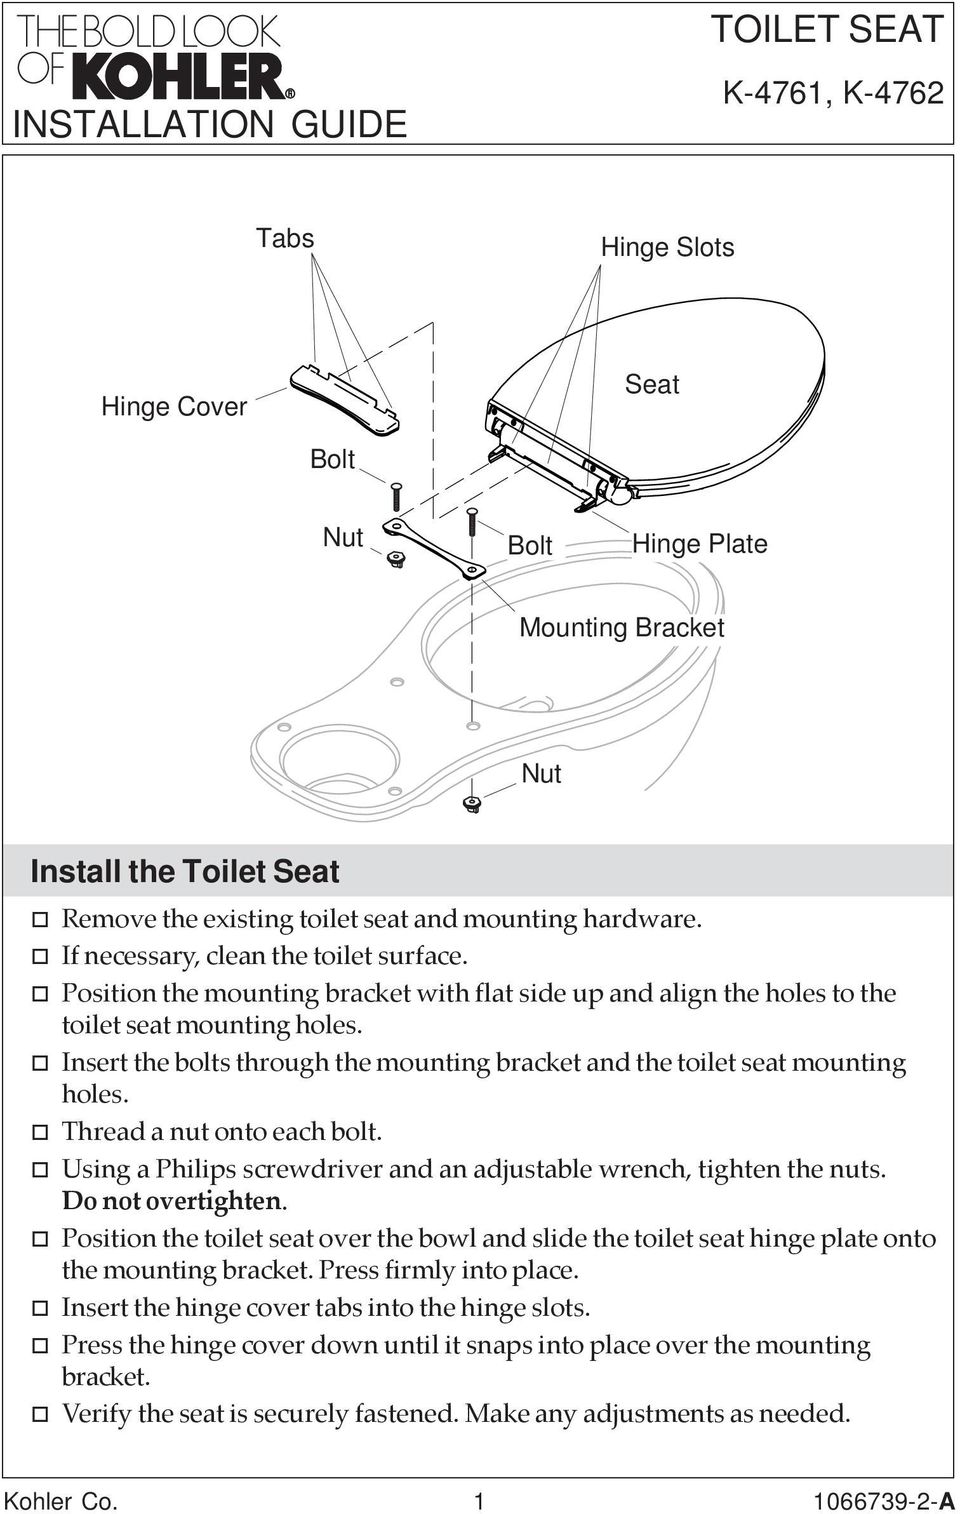 Insert the bolts through the mounting bracket and the toilet seat mounting holes. Thread a nut onto each bolt. Using a Philips screwdriver and an adjustable wrench, tighten the nuts.